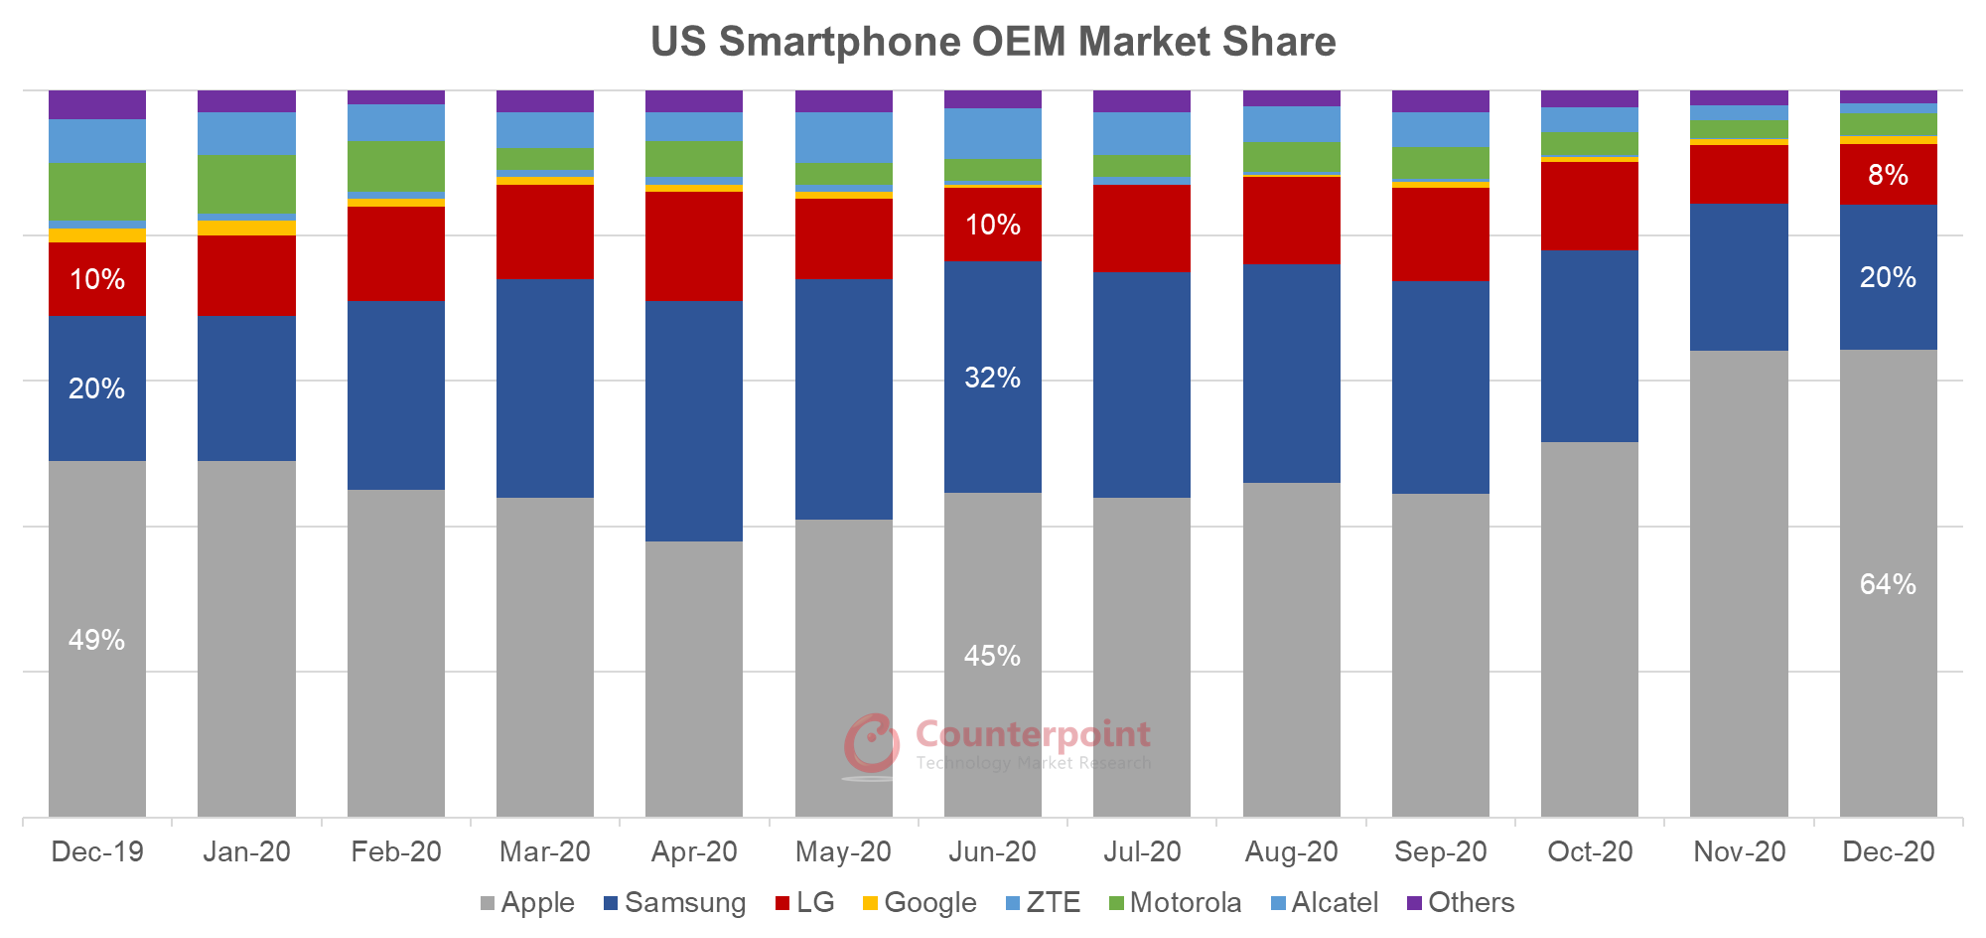 Conterpoint Research - USA Smartphone OEM Market Share Dec-19 to Dec-20